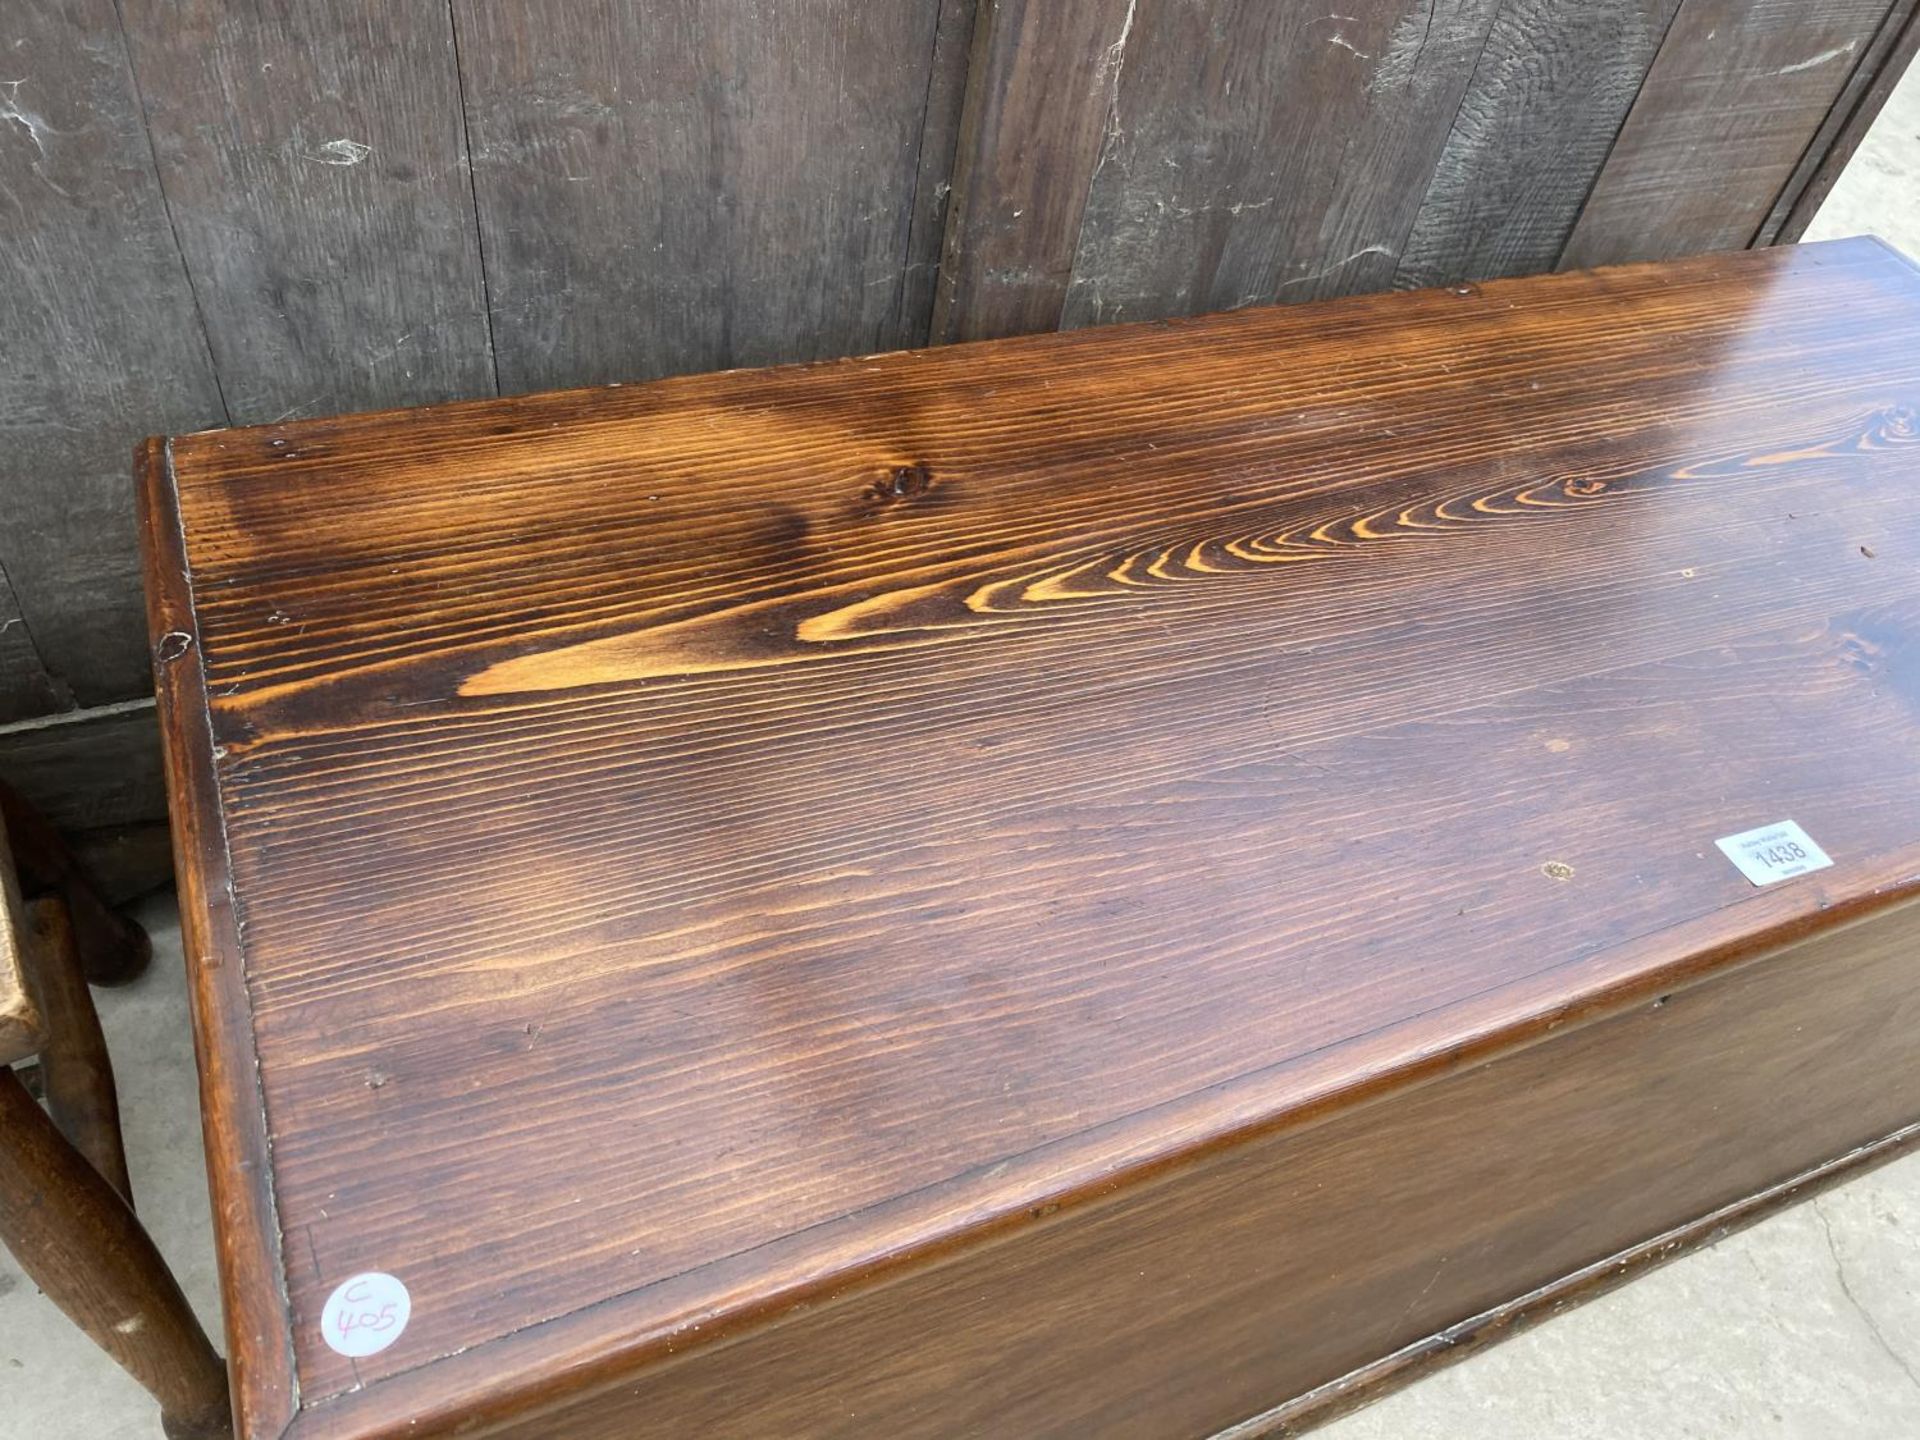 A PINE BLANKET CHEST - Image 2 of 5